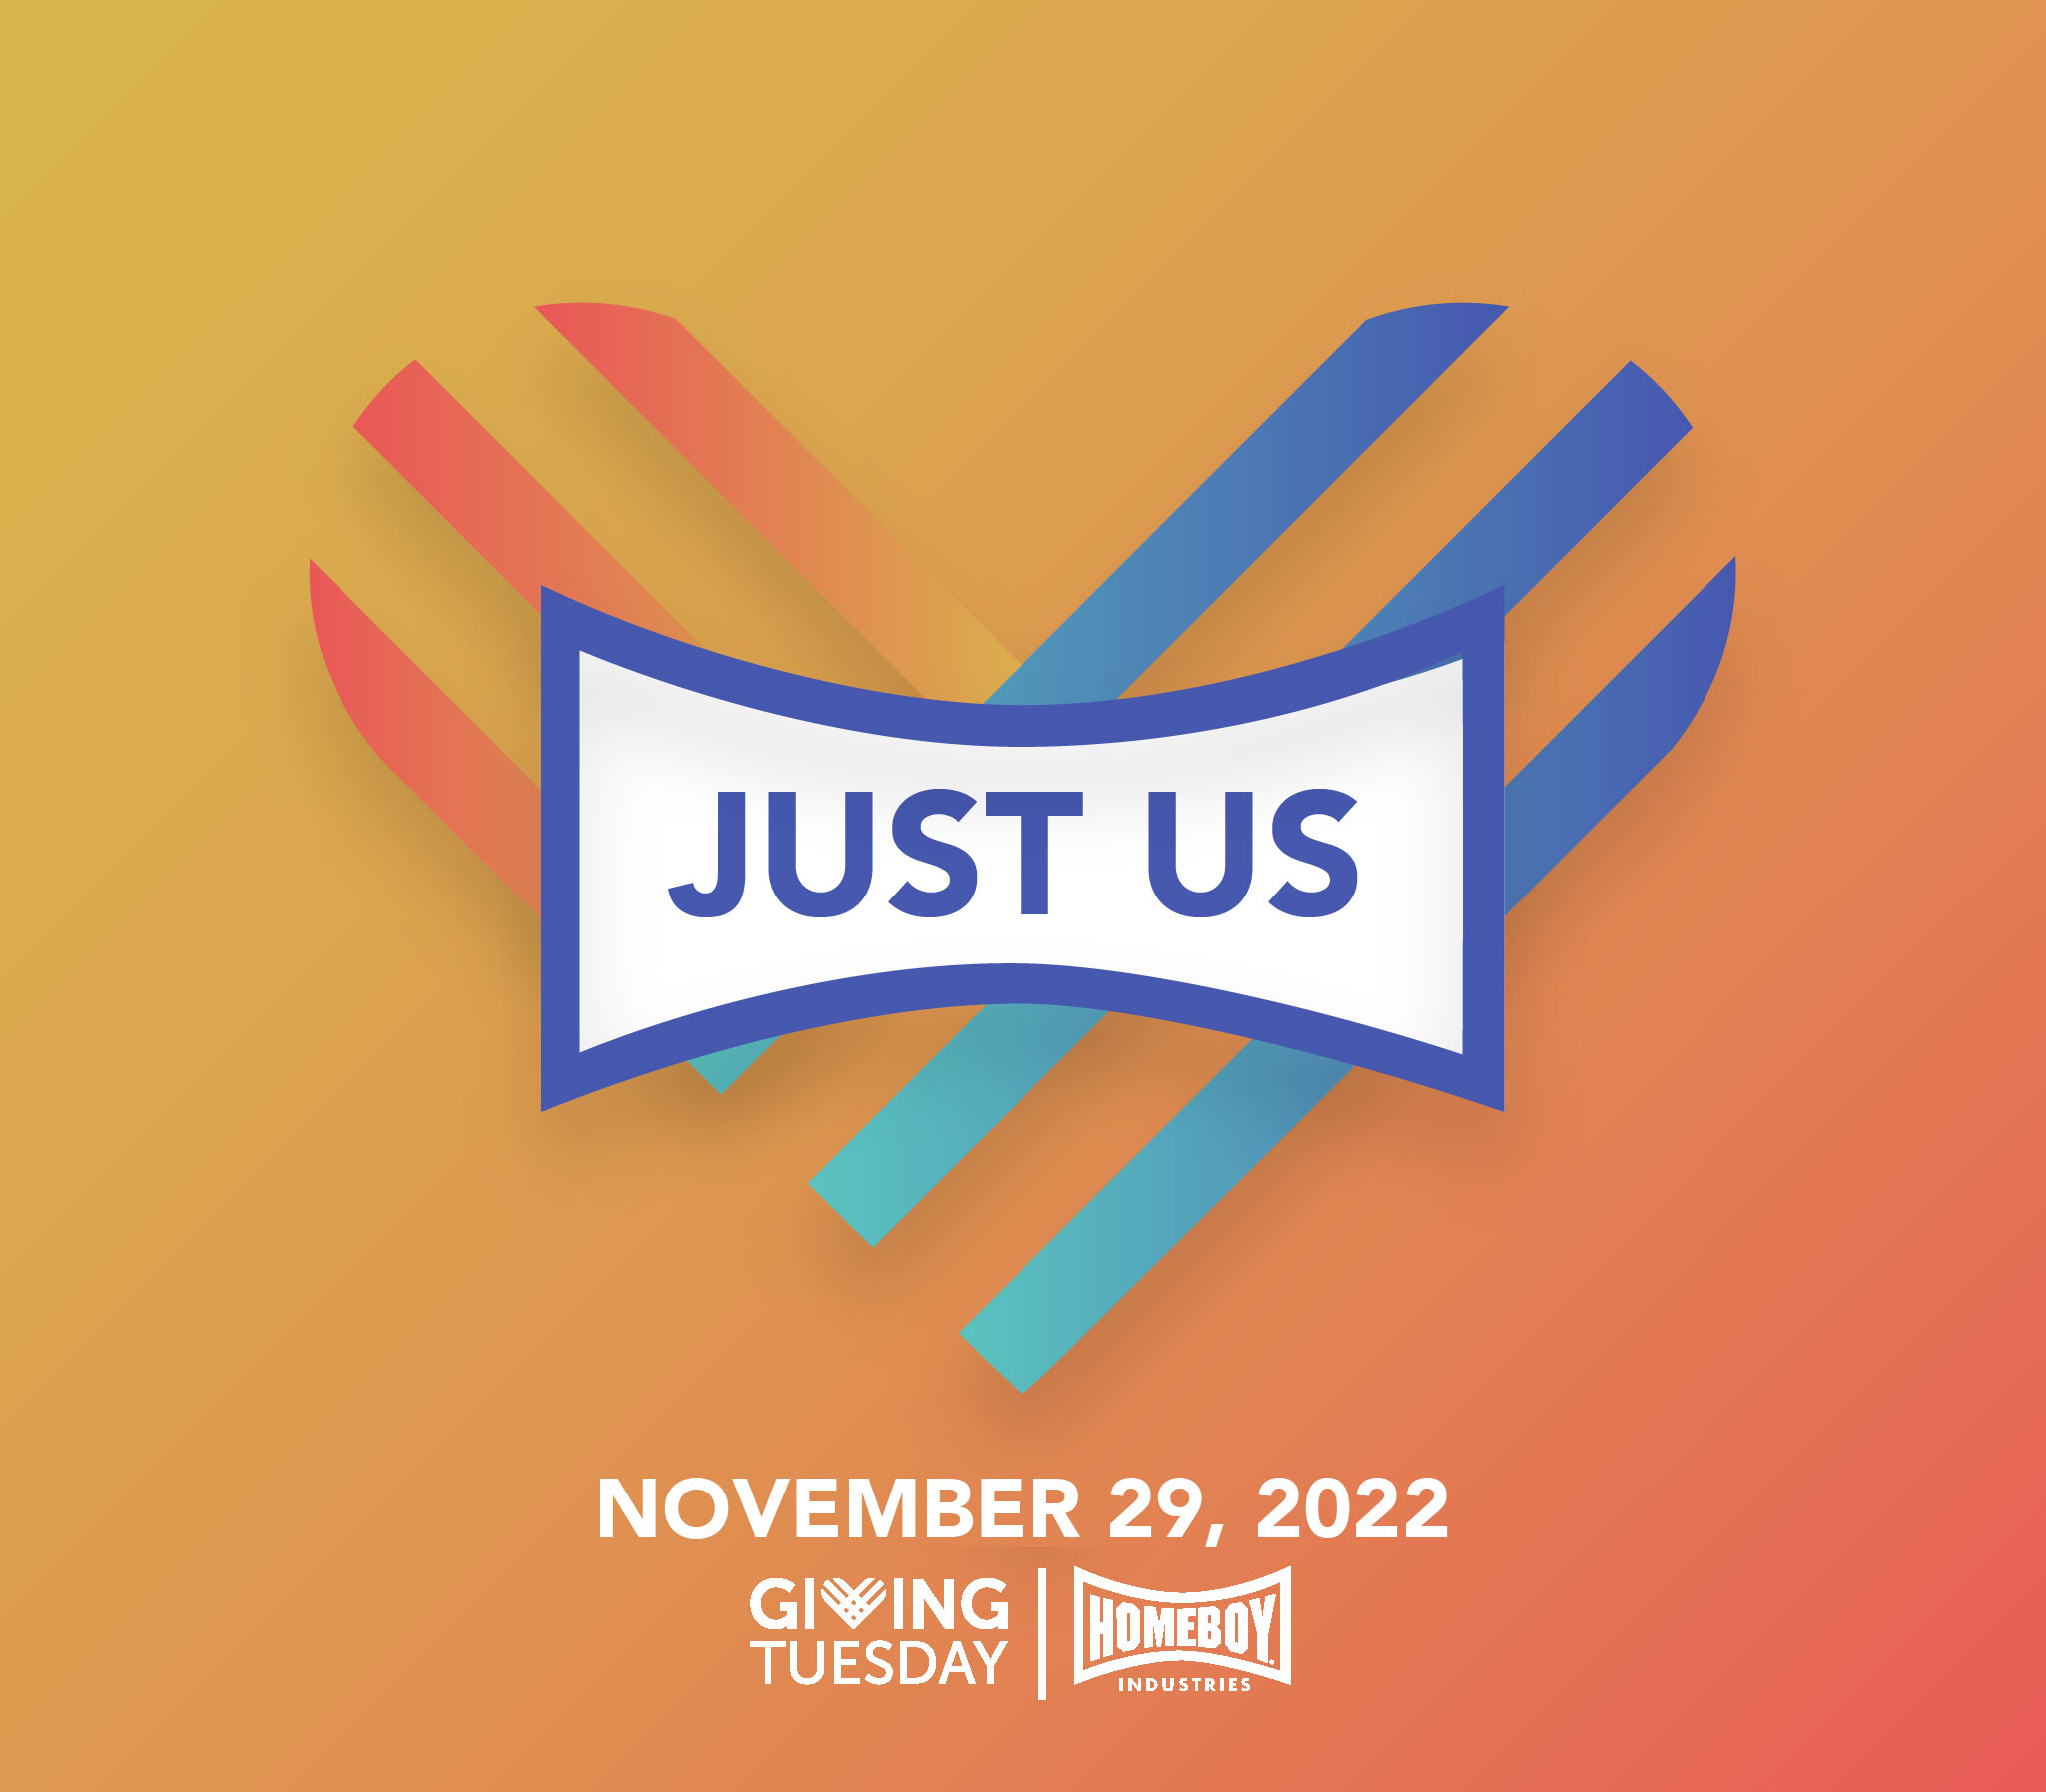 JUST US | STAND WITH HOMEBOY INDUSTRIES ON GIVING TUESDAY